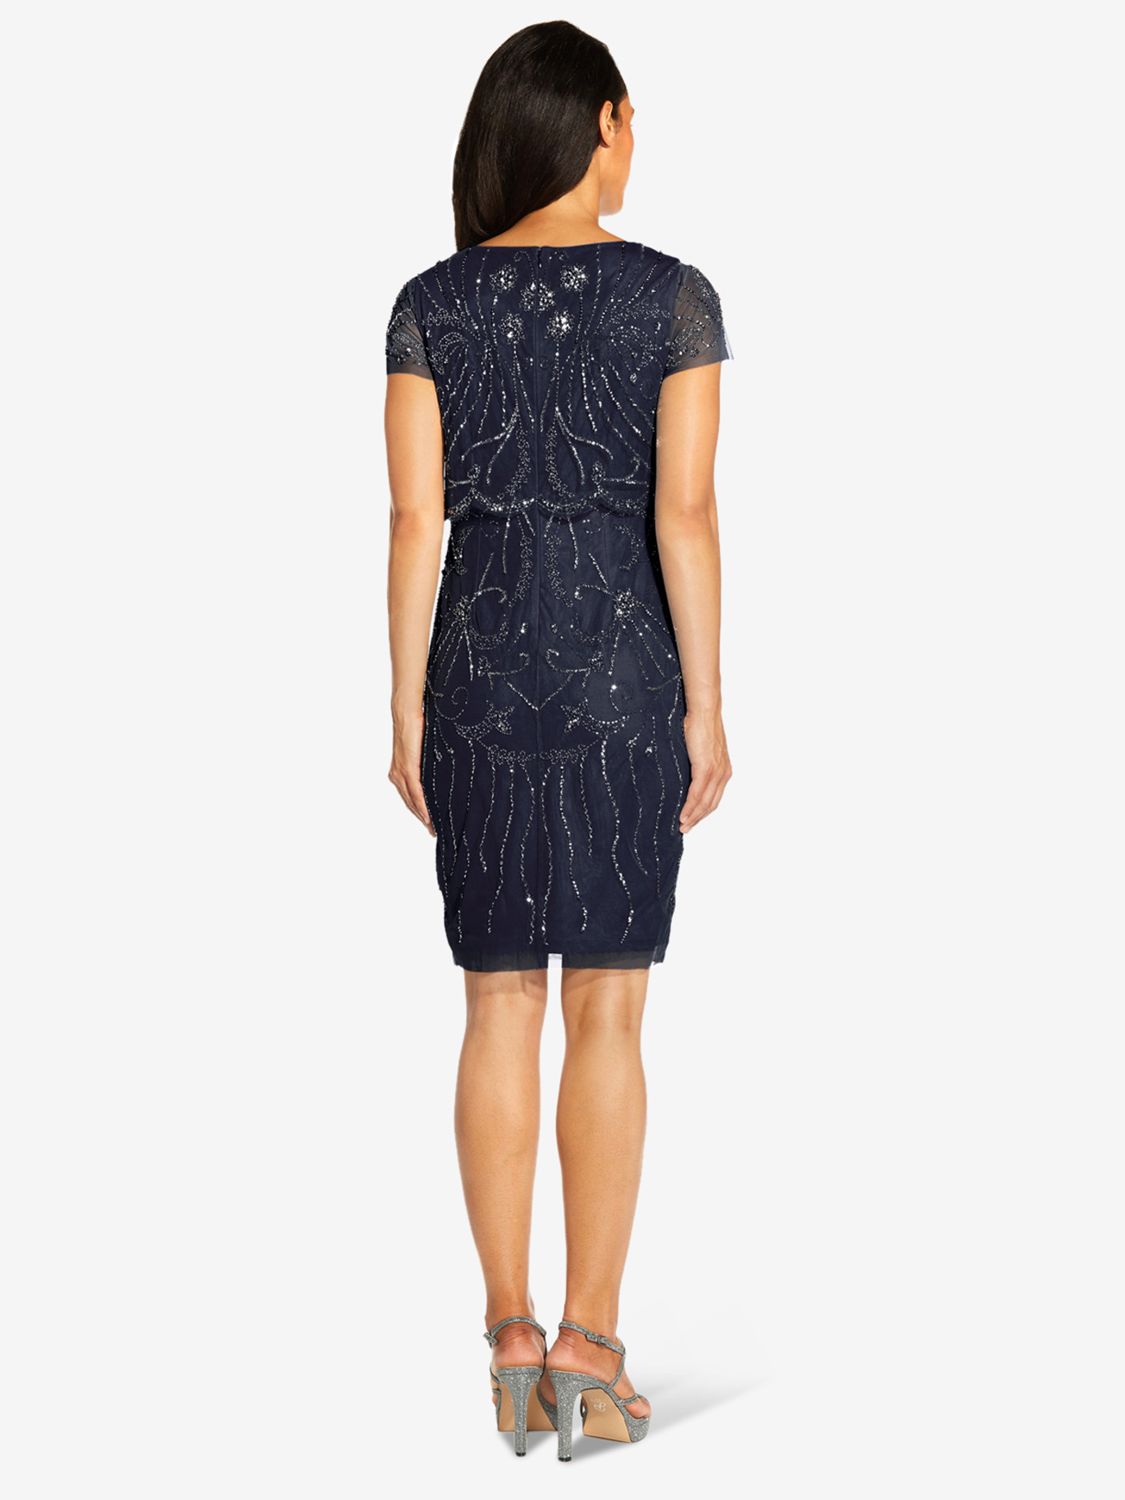 Buy Adrianna Papell Beaded Cocktail Dress, Midnight Online at johnlewis.com